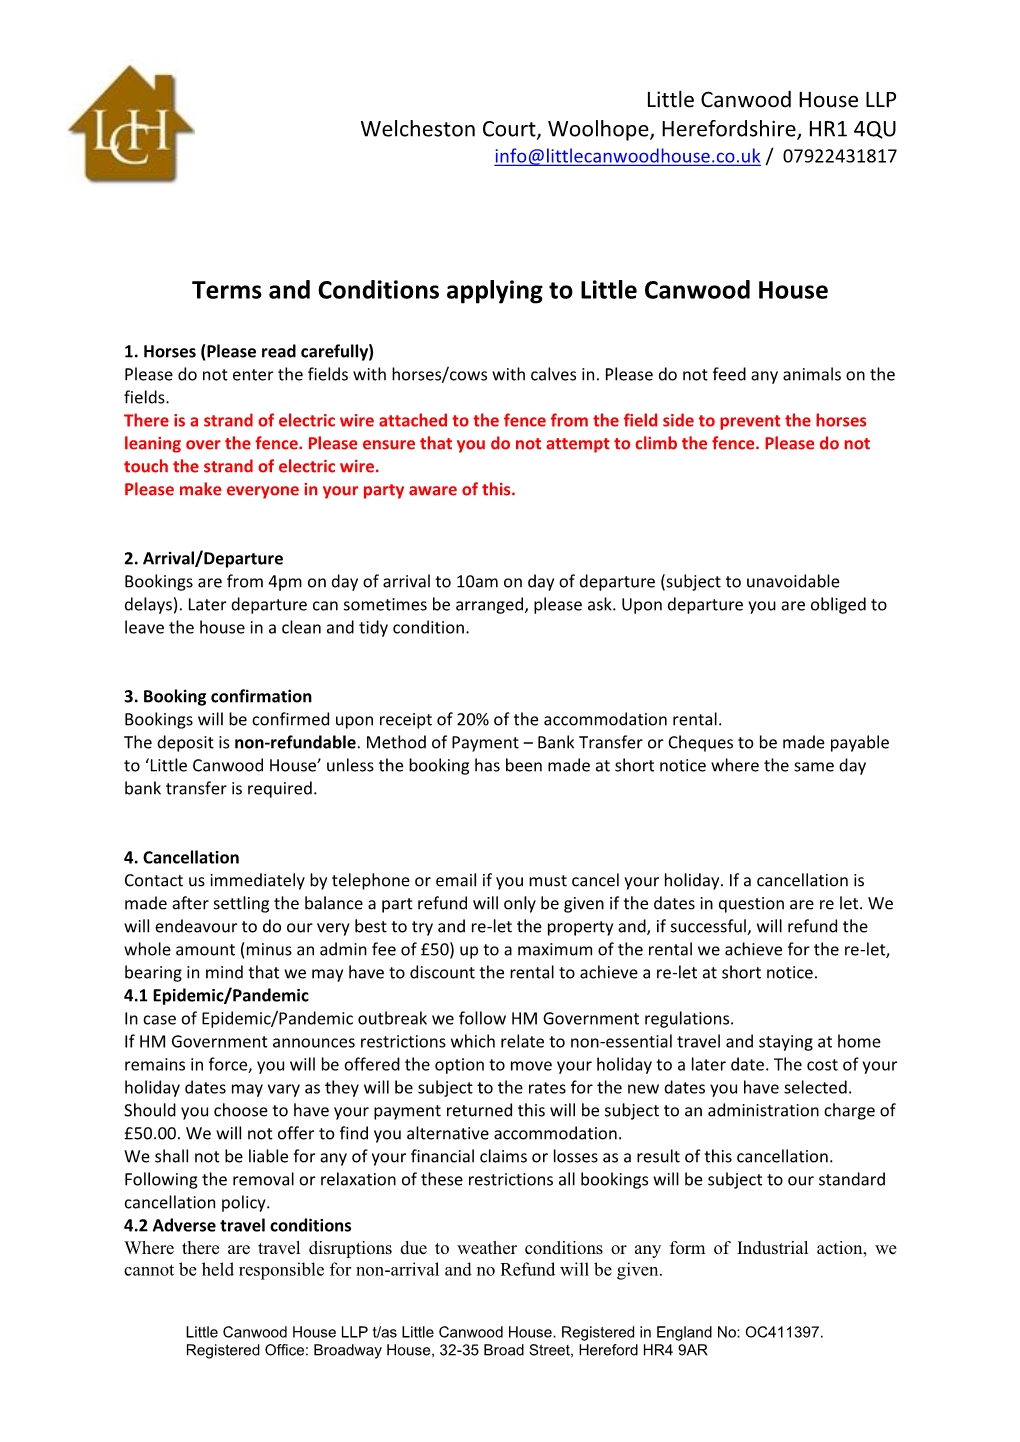 Terms and Conditions Applying to Little Canwood House